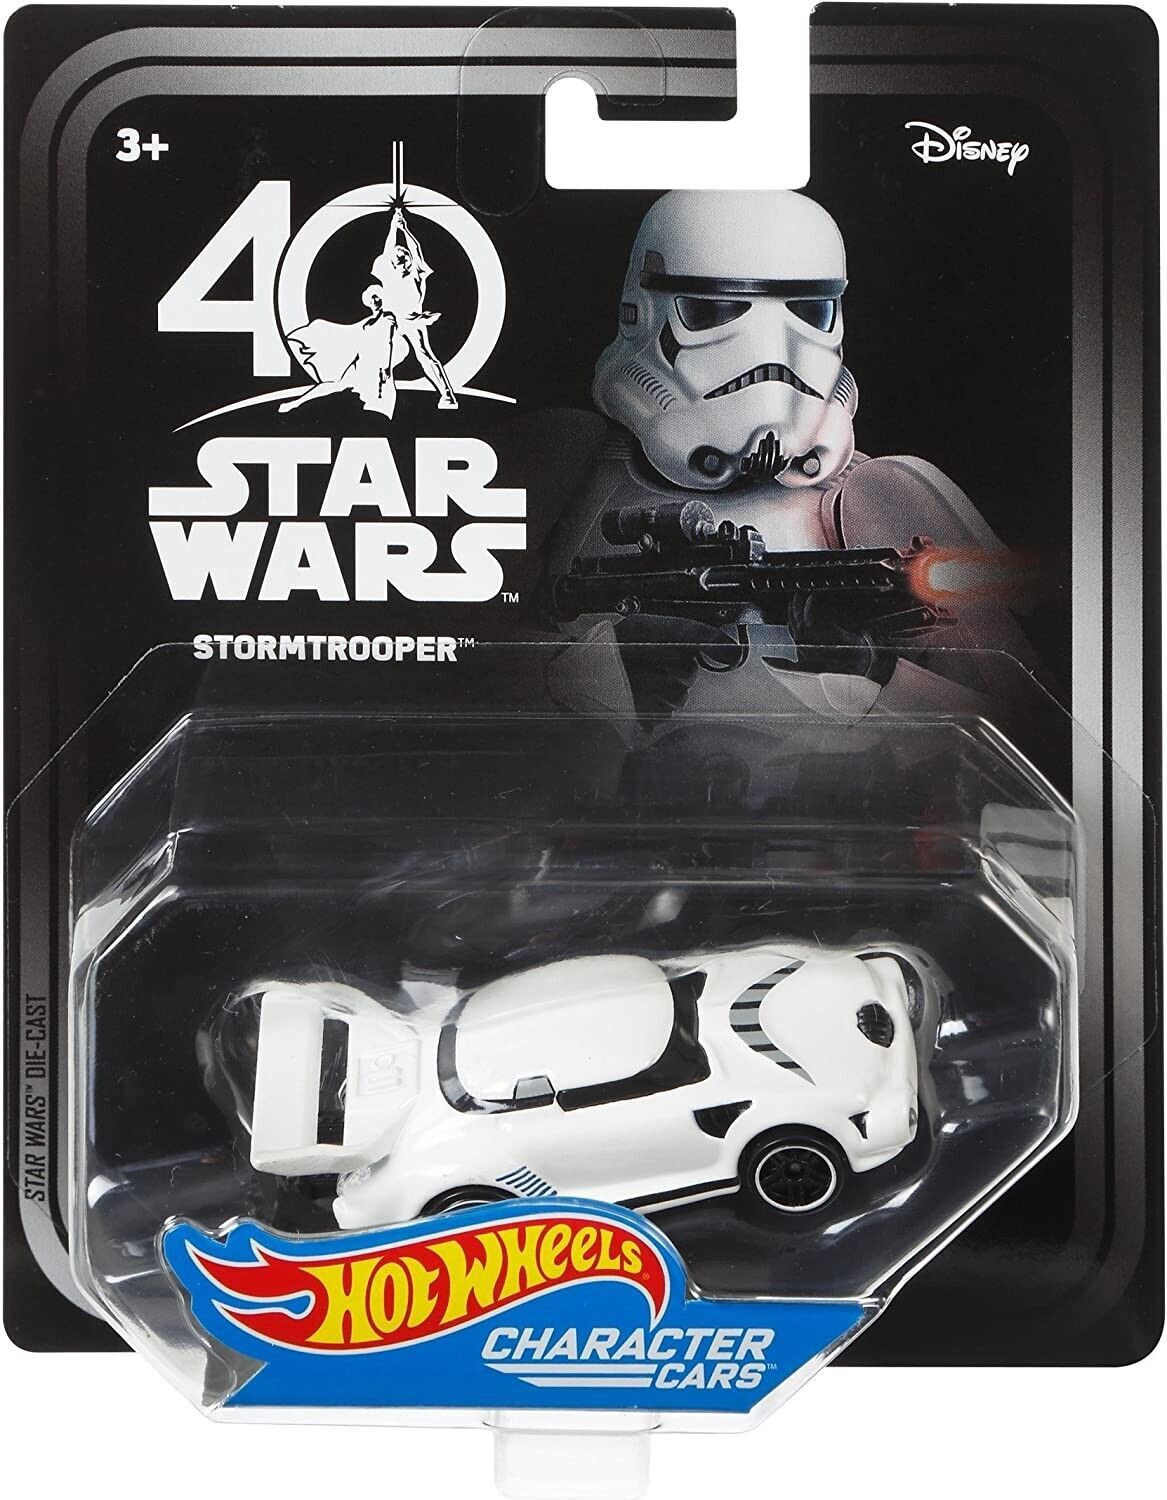 Primary image for Star Wars 40th Anniversary Storm Trooper Hot Wheels Character Car A New Hope HW4